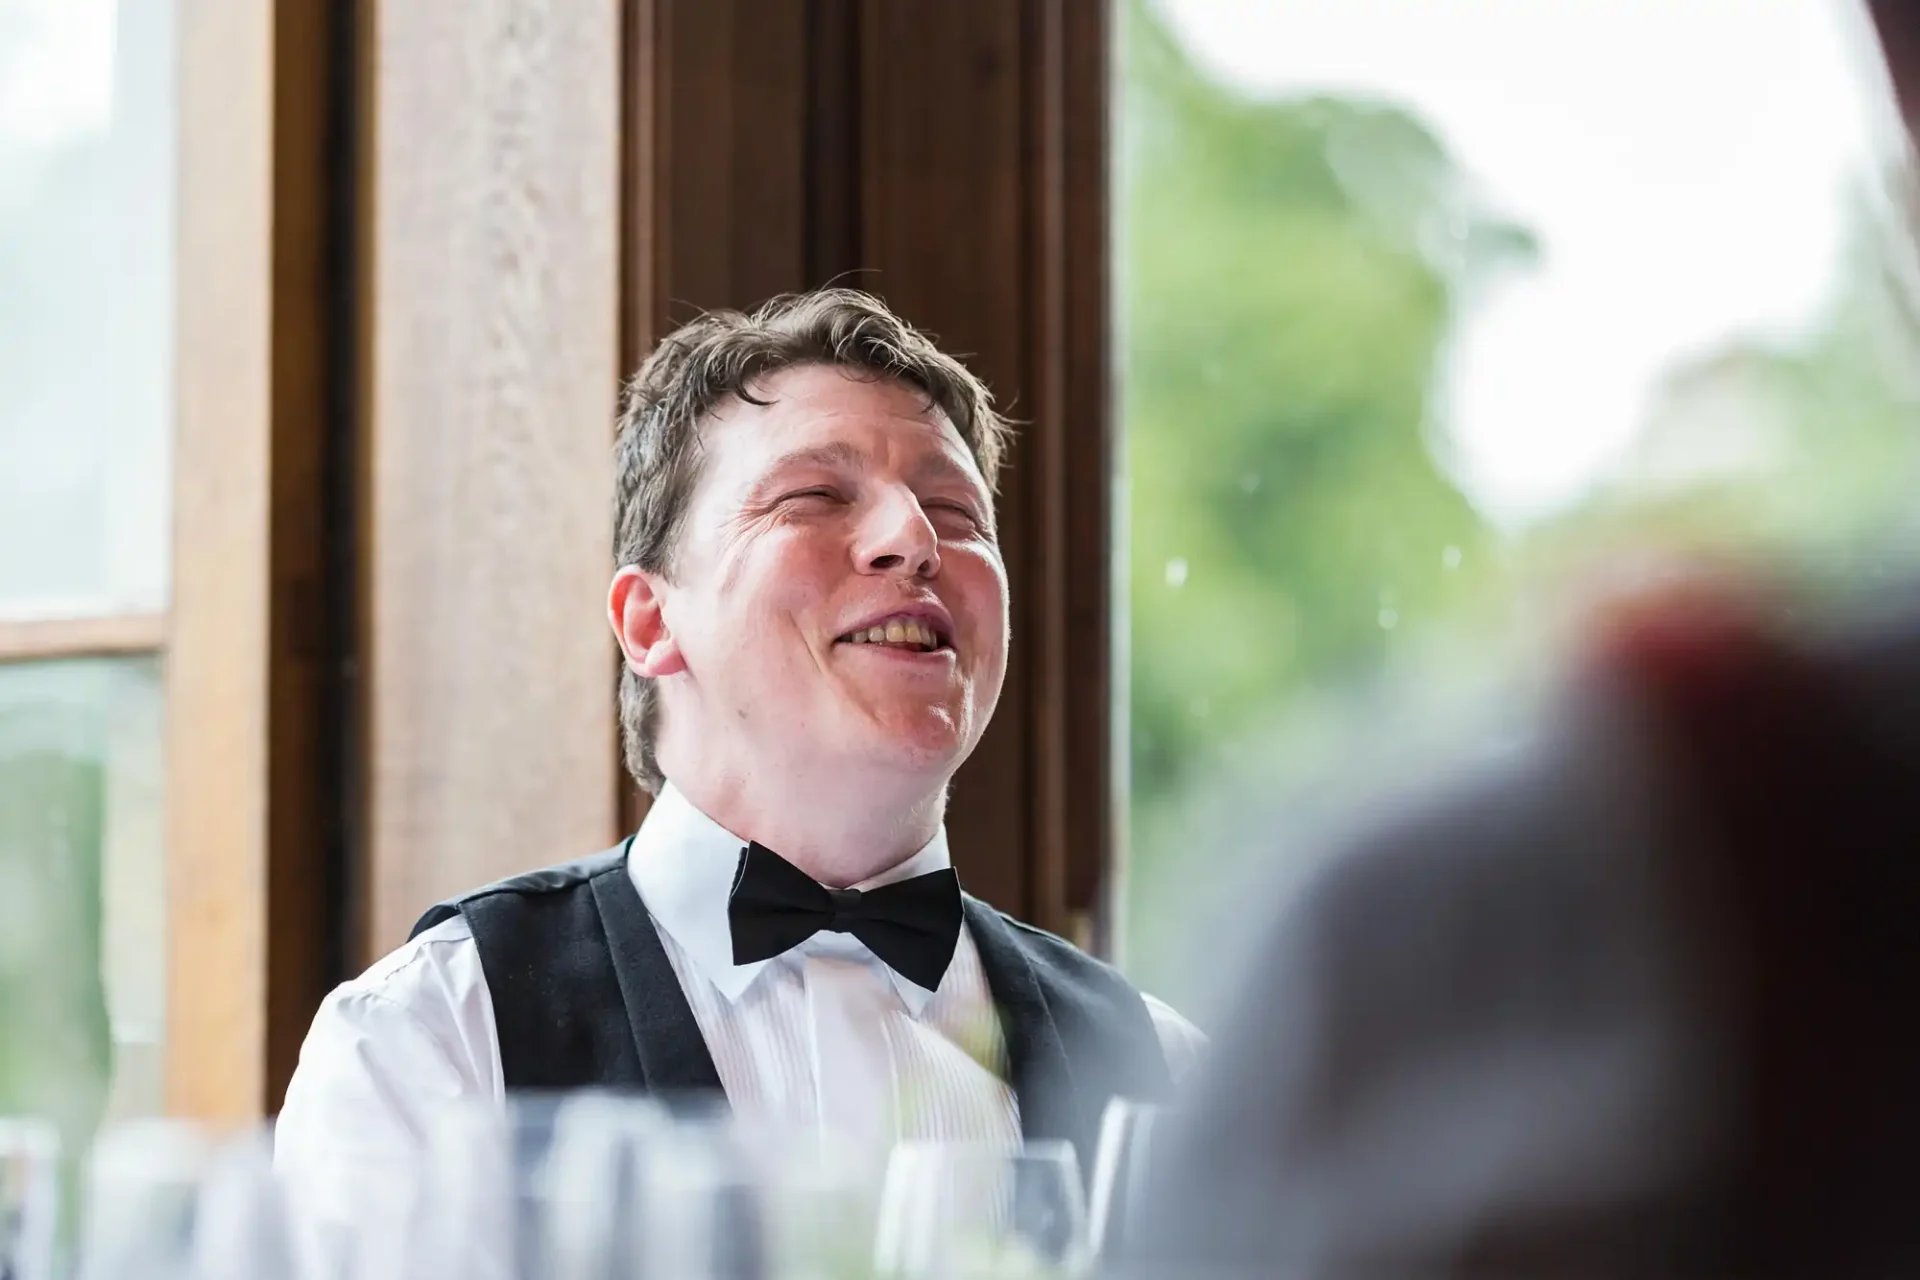 Man in a tuxedo with a bow tie laughing joyfully at a social event, seated indoors with large windows in the background.